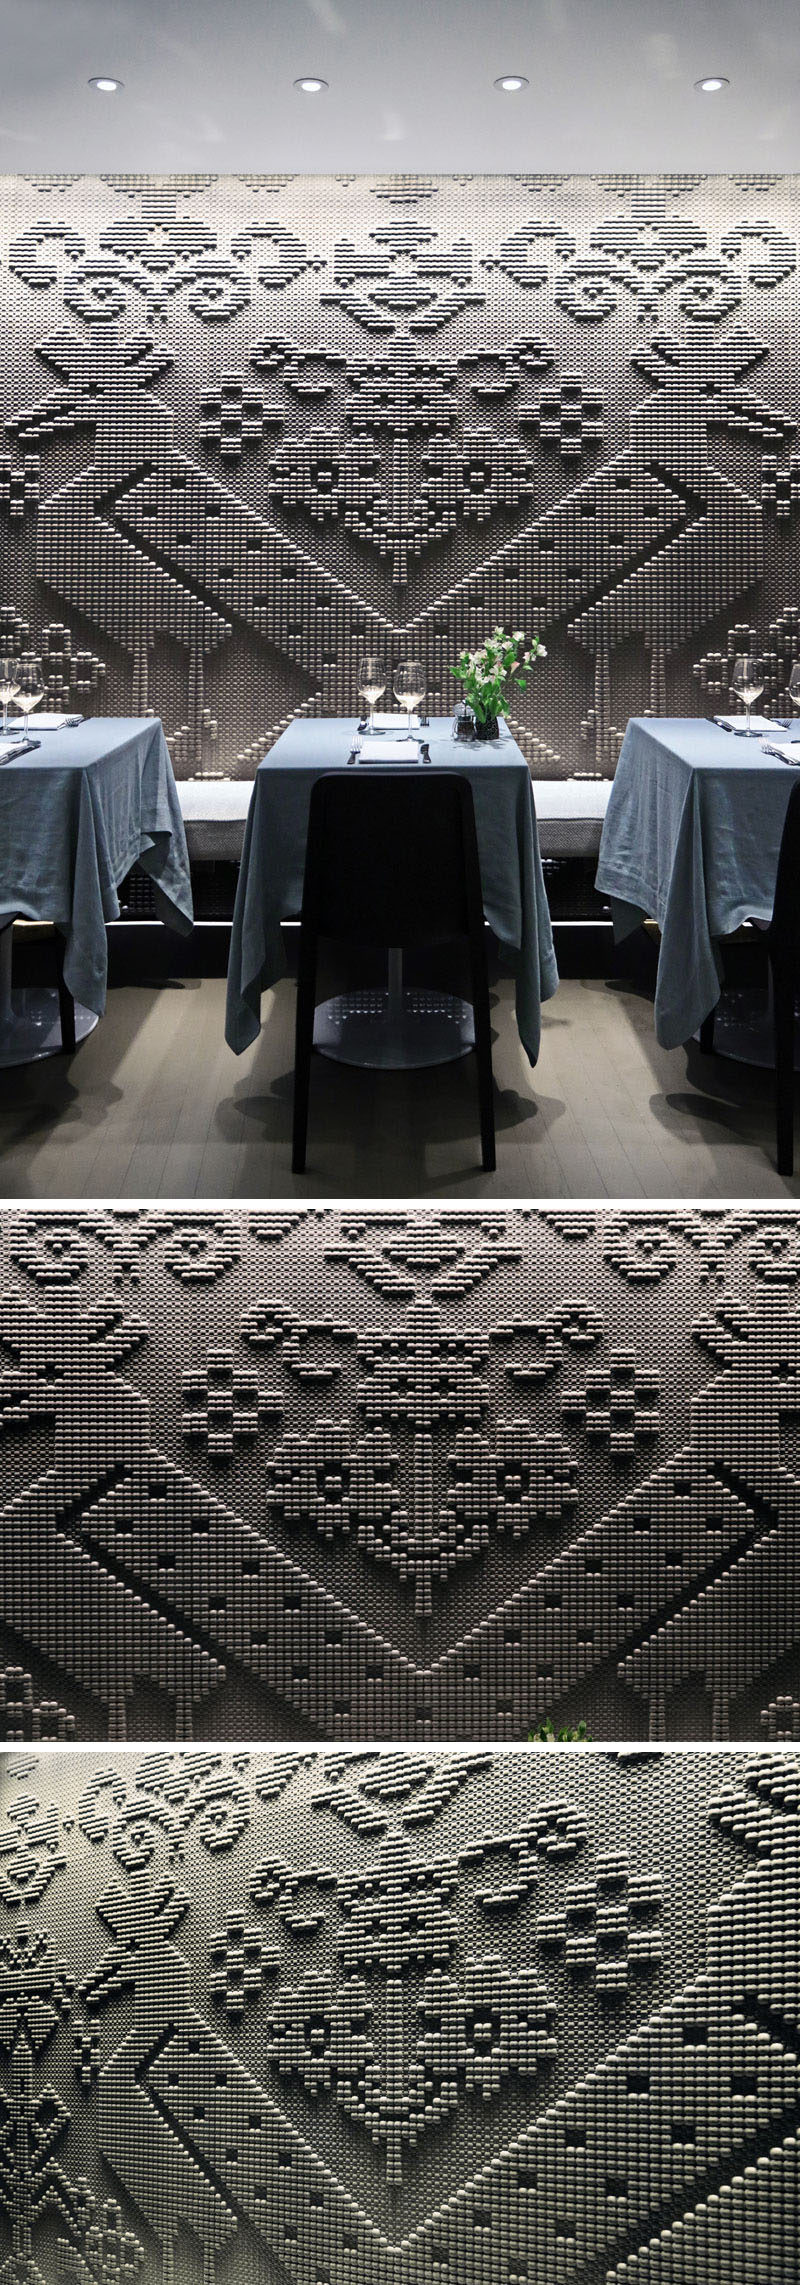 Wall Decor Ideas - A chiseled natural stone tapestry covers the wall of this modern restaurant.